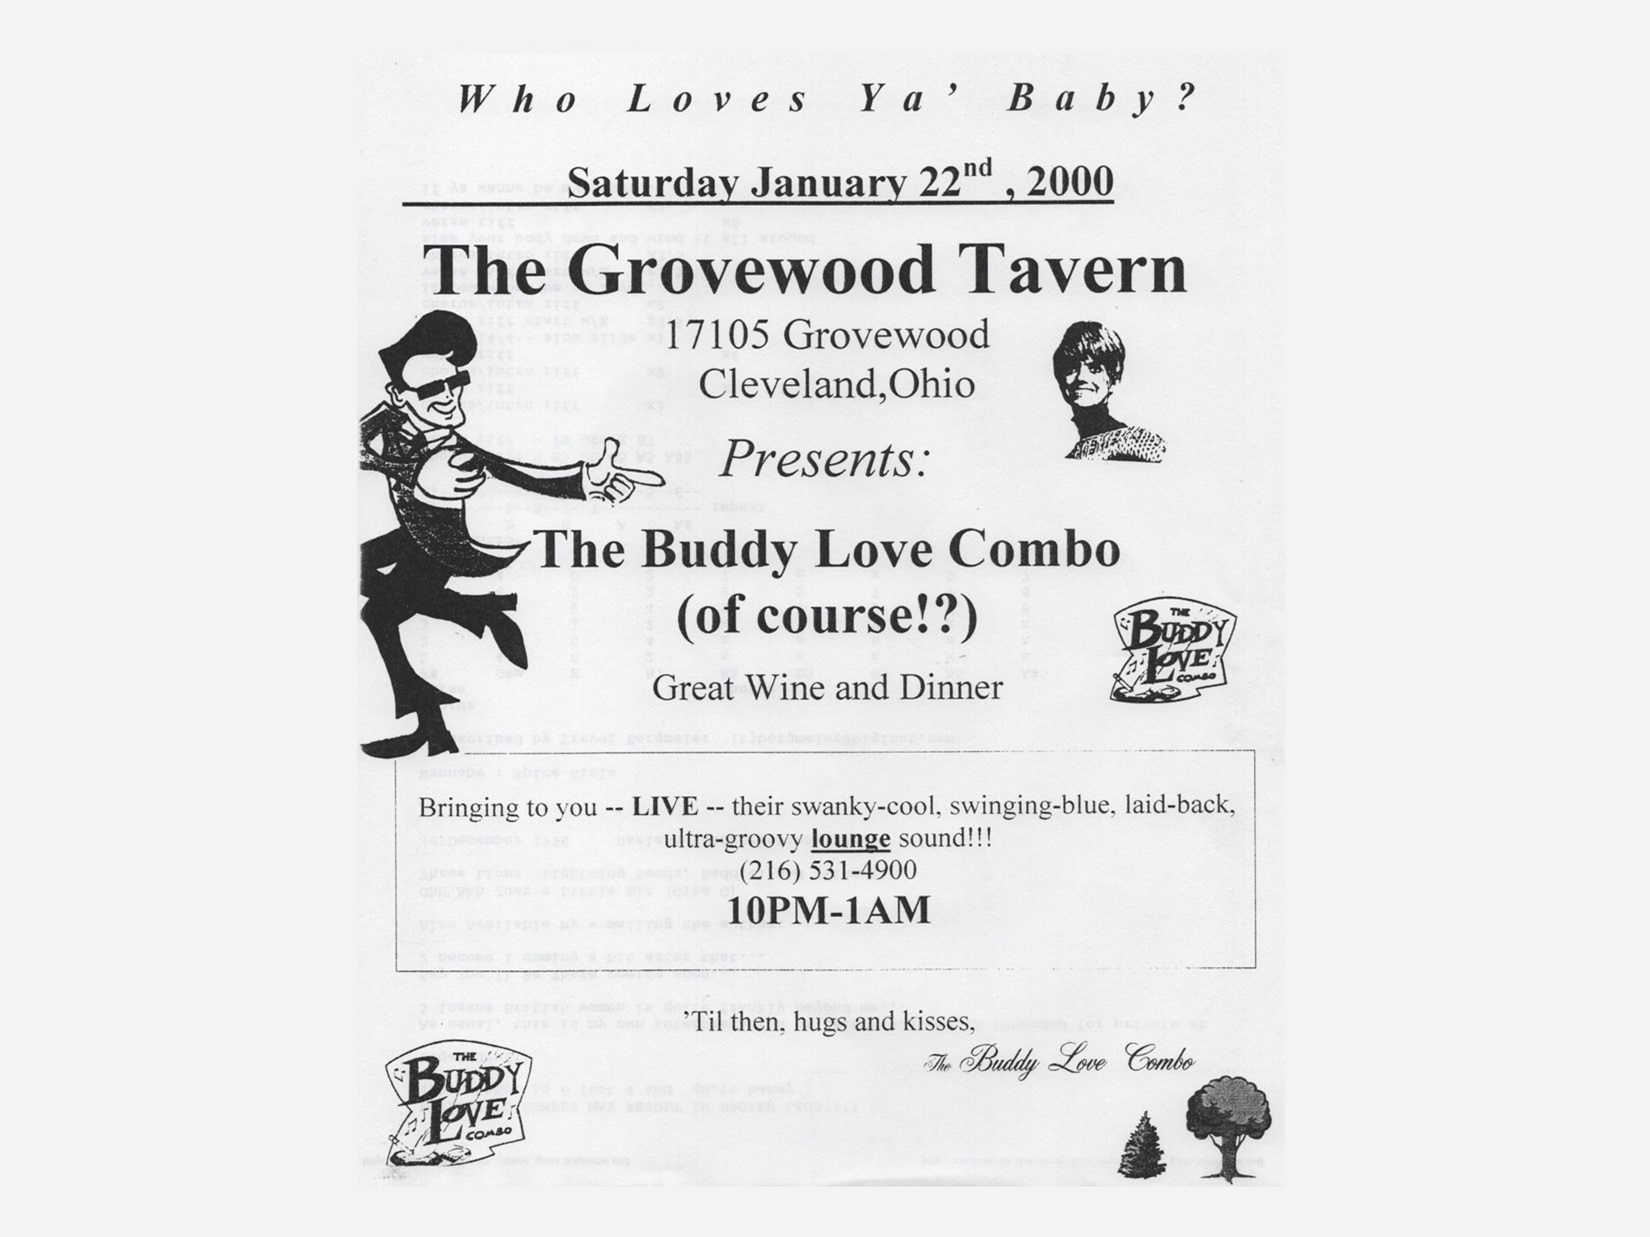 Buddy Love Combo at Grovewood Tavern in 1999